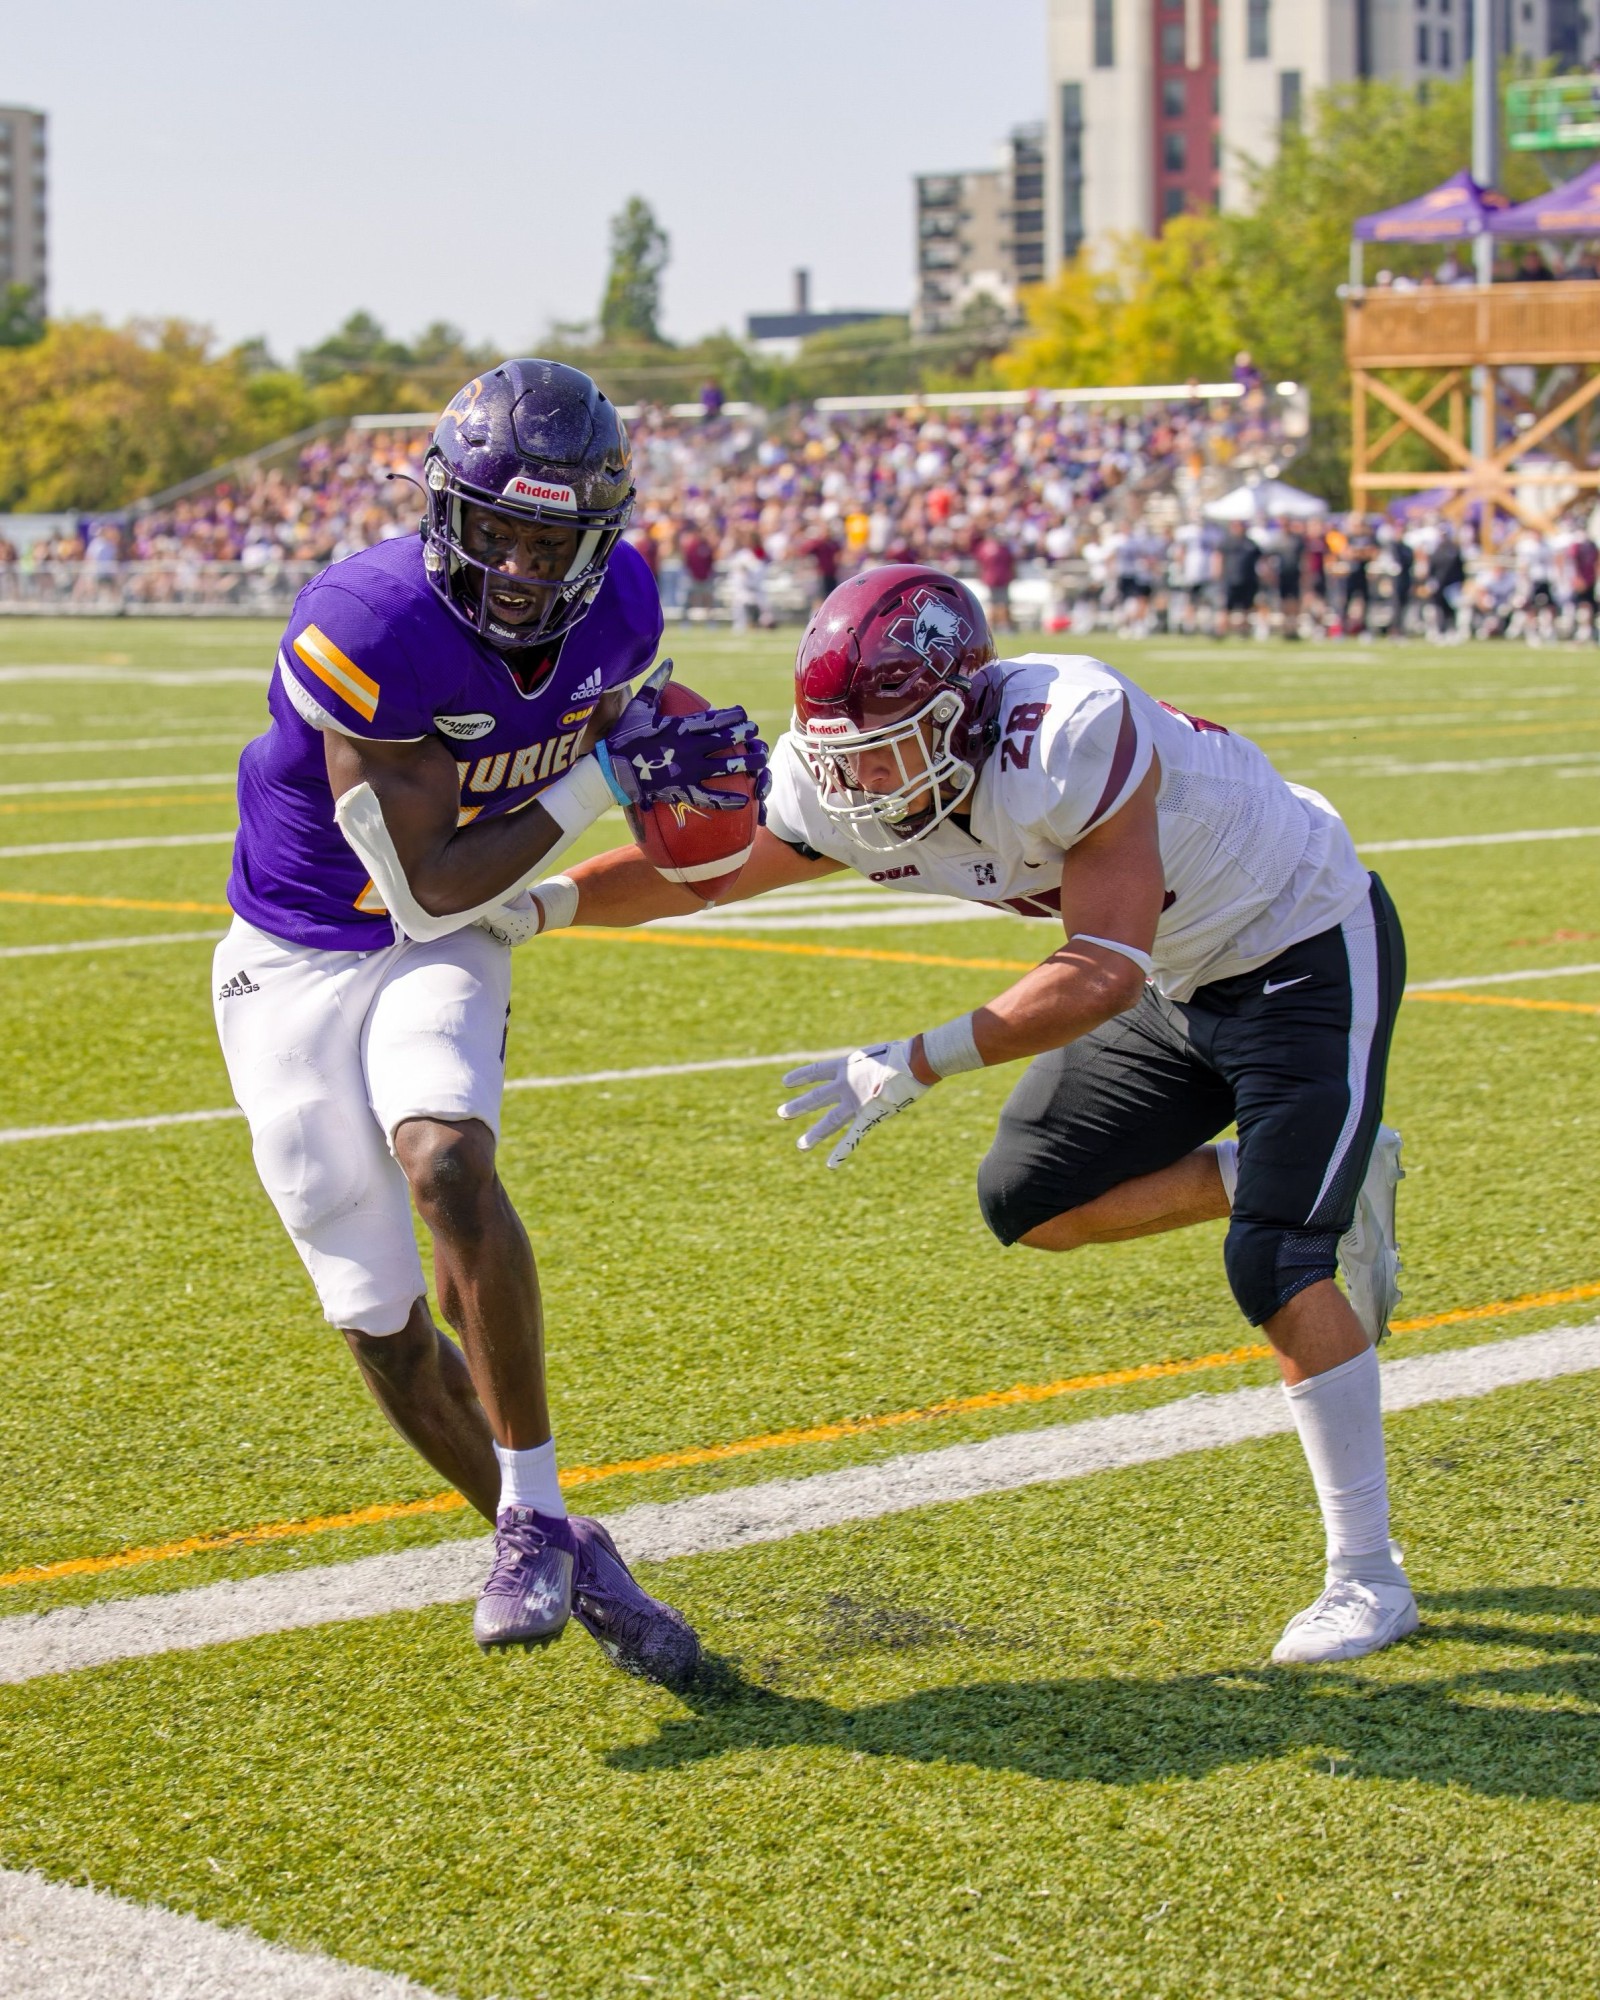 Laurier football player running with the ball